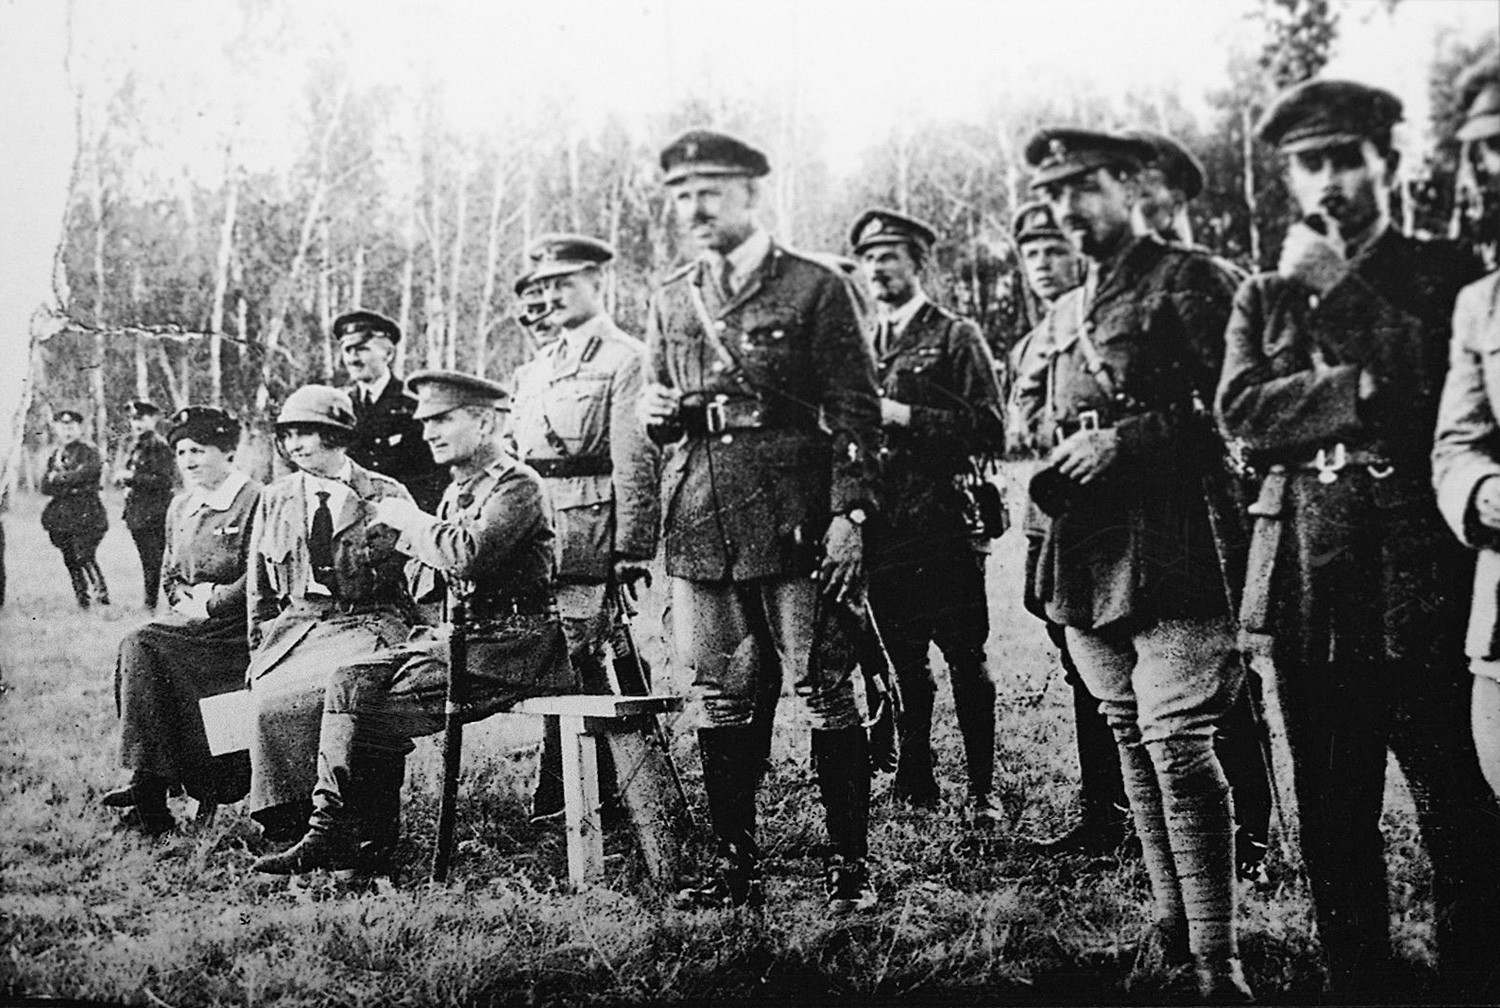 Admiral Alexander Kolchak, the leader of the anti-Bolshevik movement (sitting, on the right), with British officers on the Eastern Front, Russia, 1918.